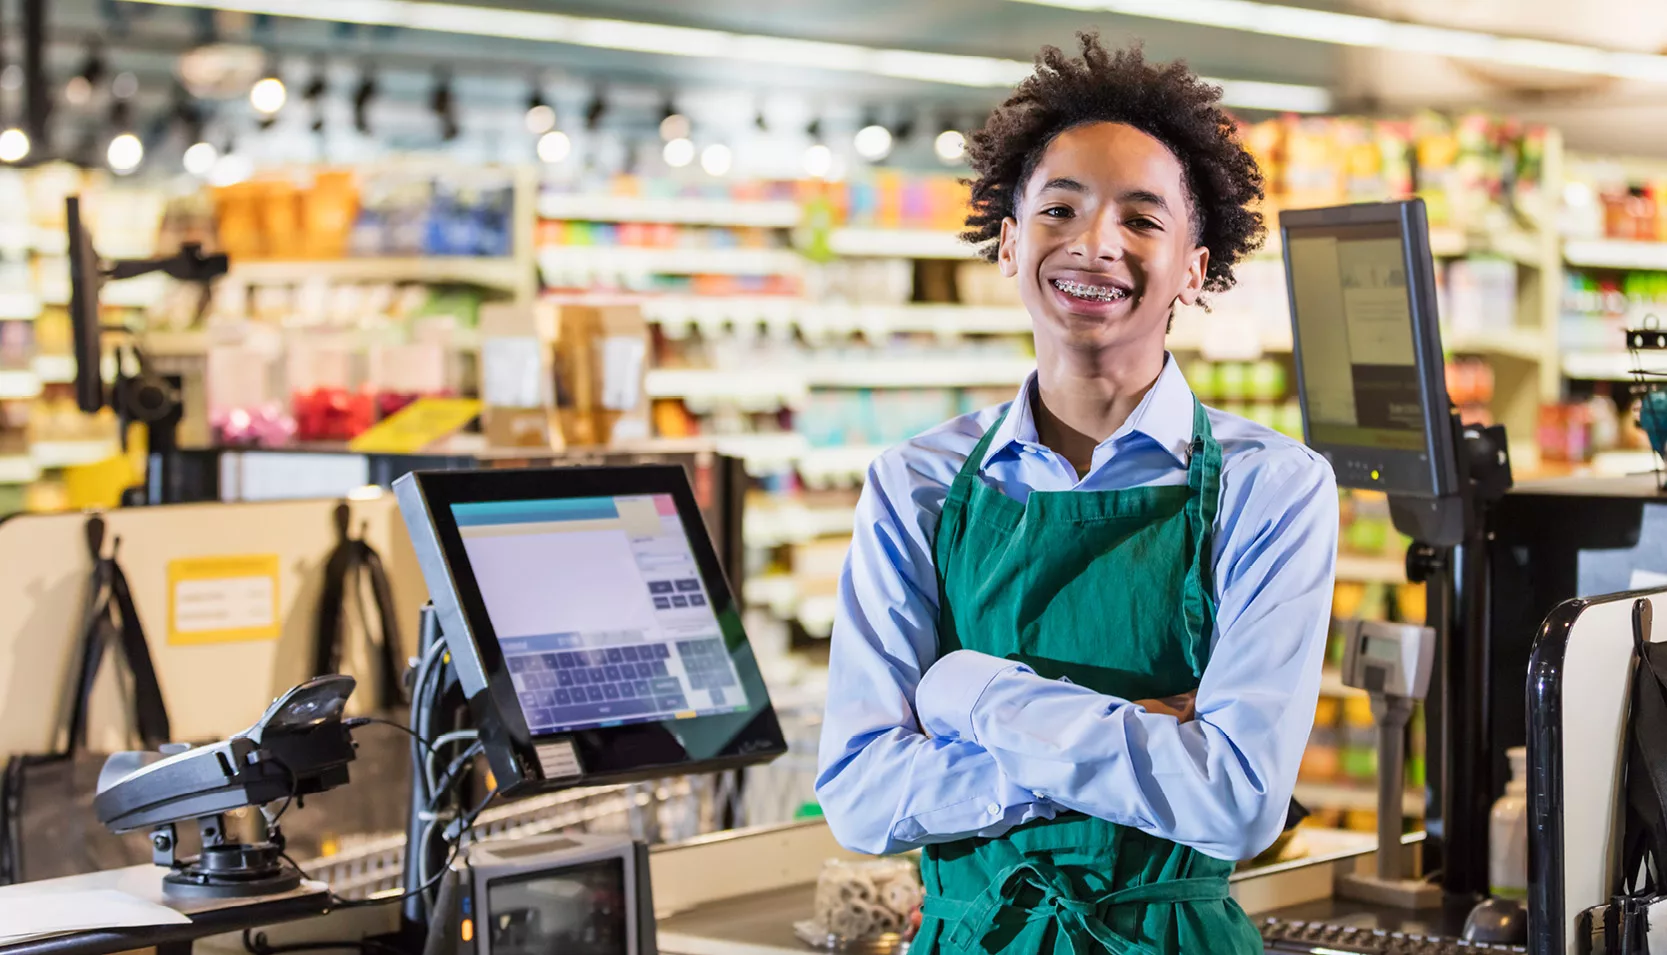 A retail service worker is smiling while standing at a checkout.